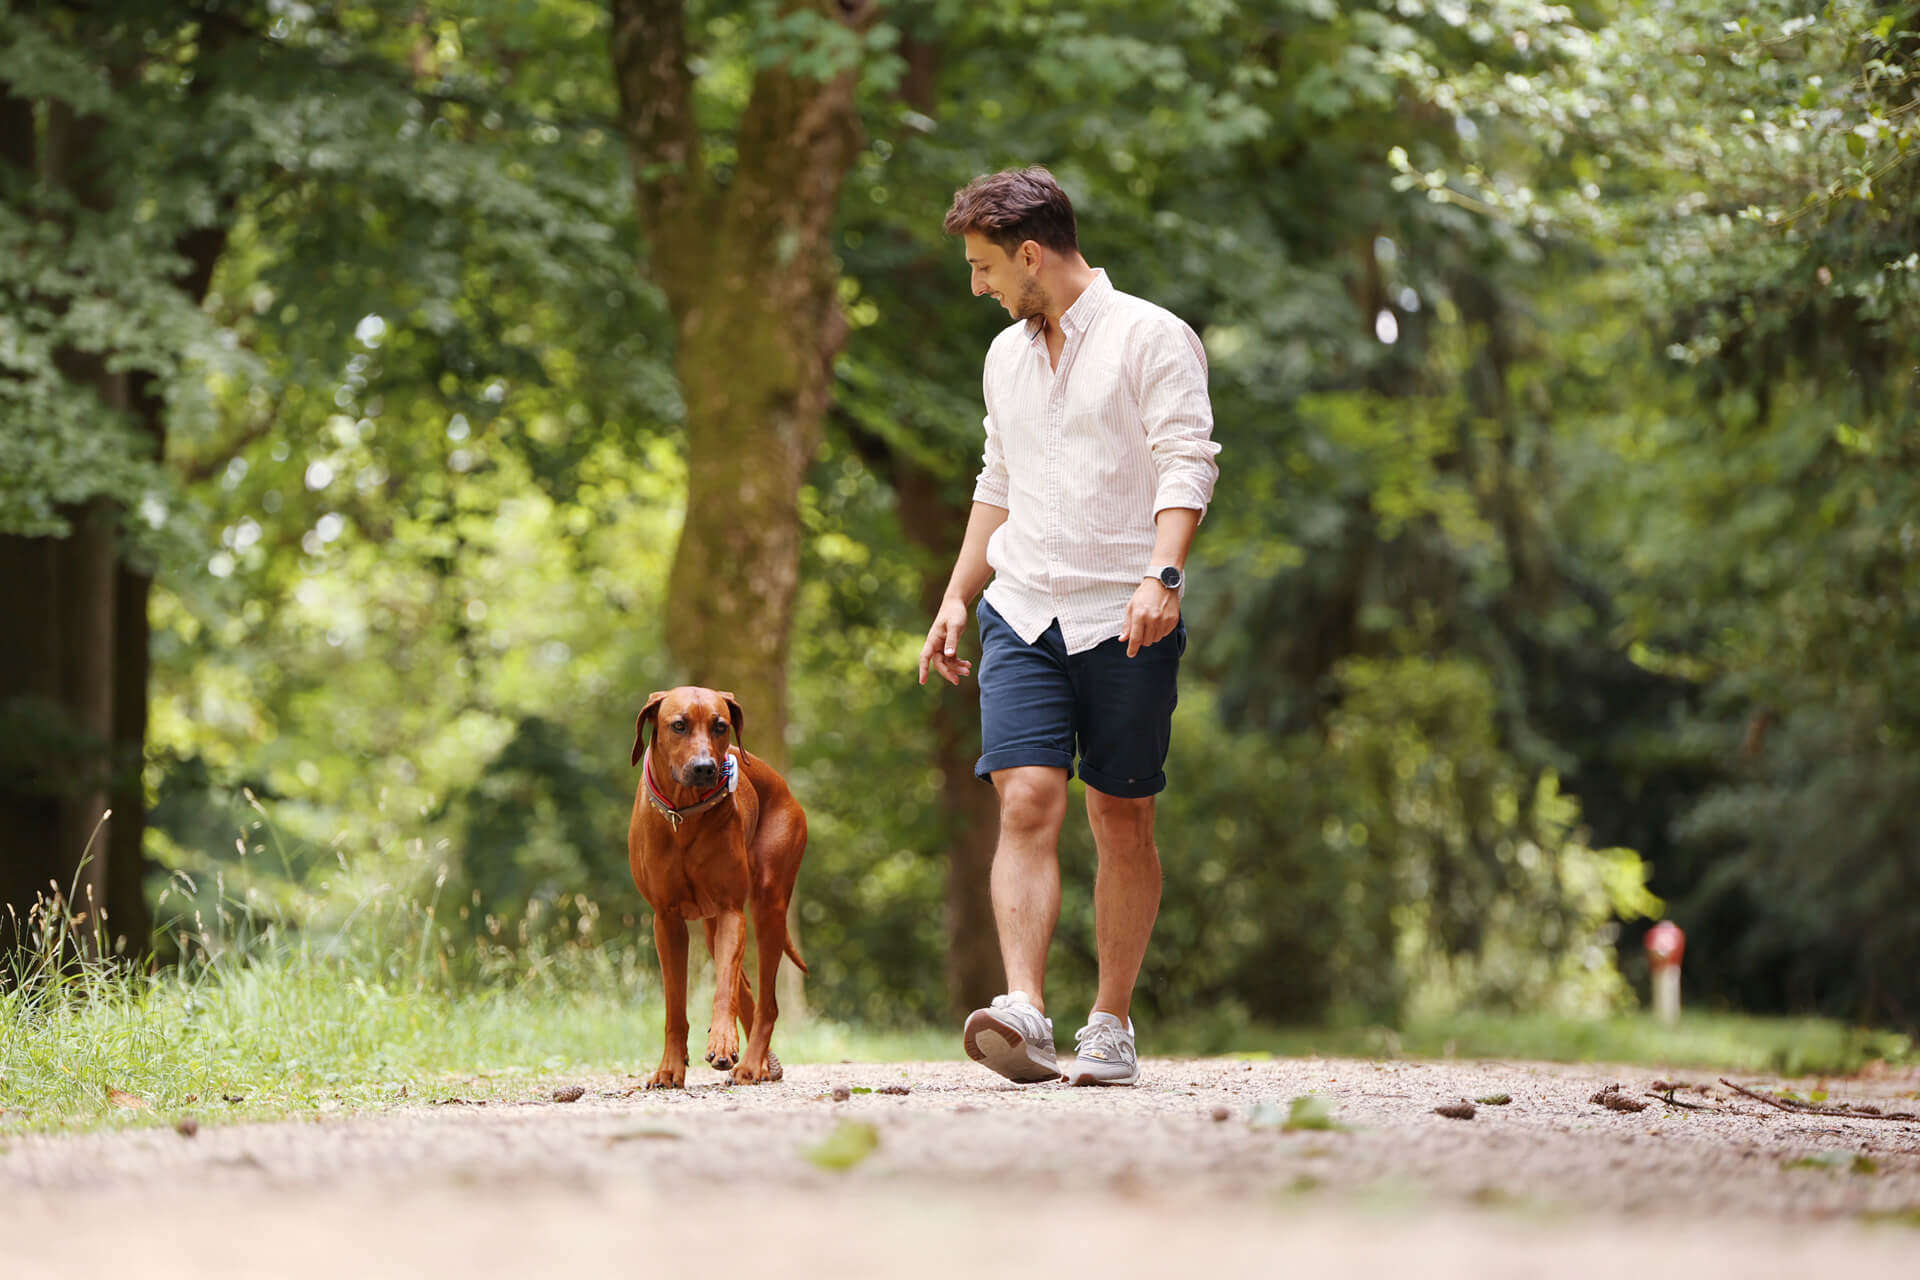 dog and man walking side by side outside, off leash with tractive gps